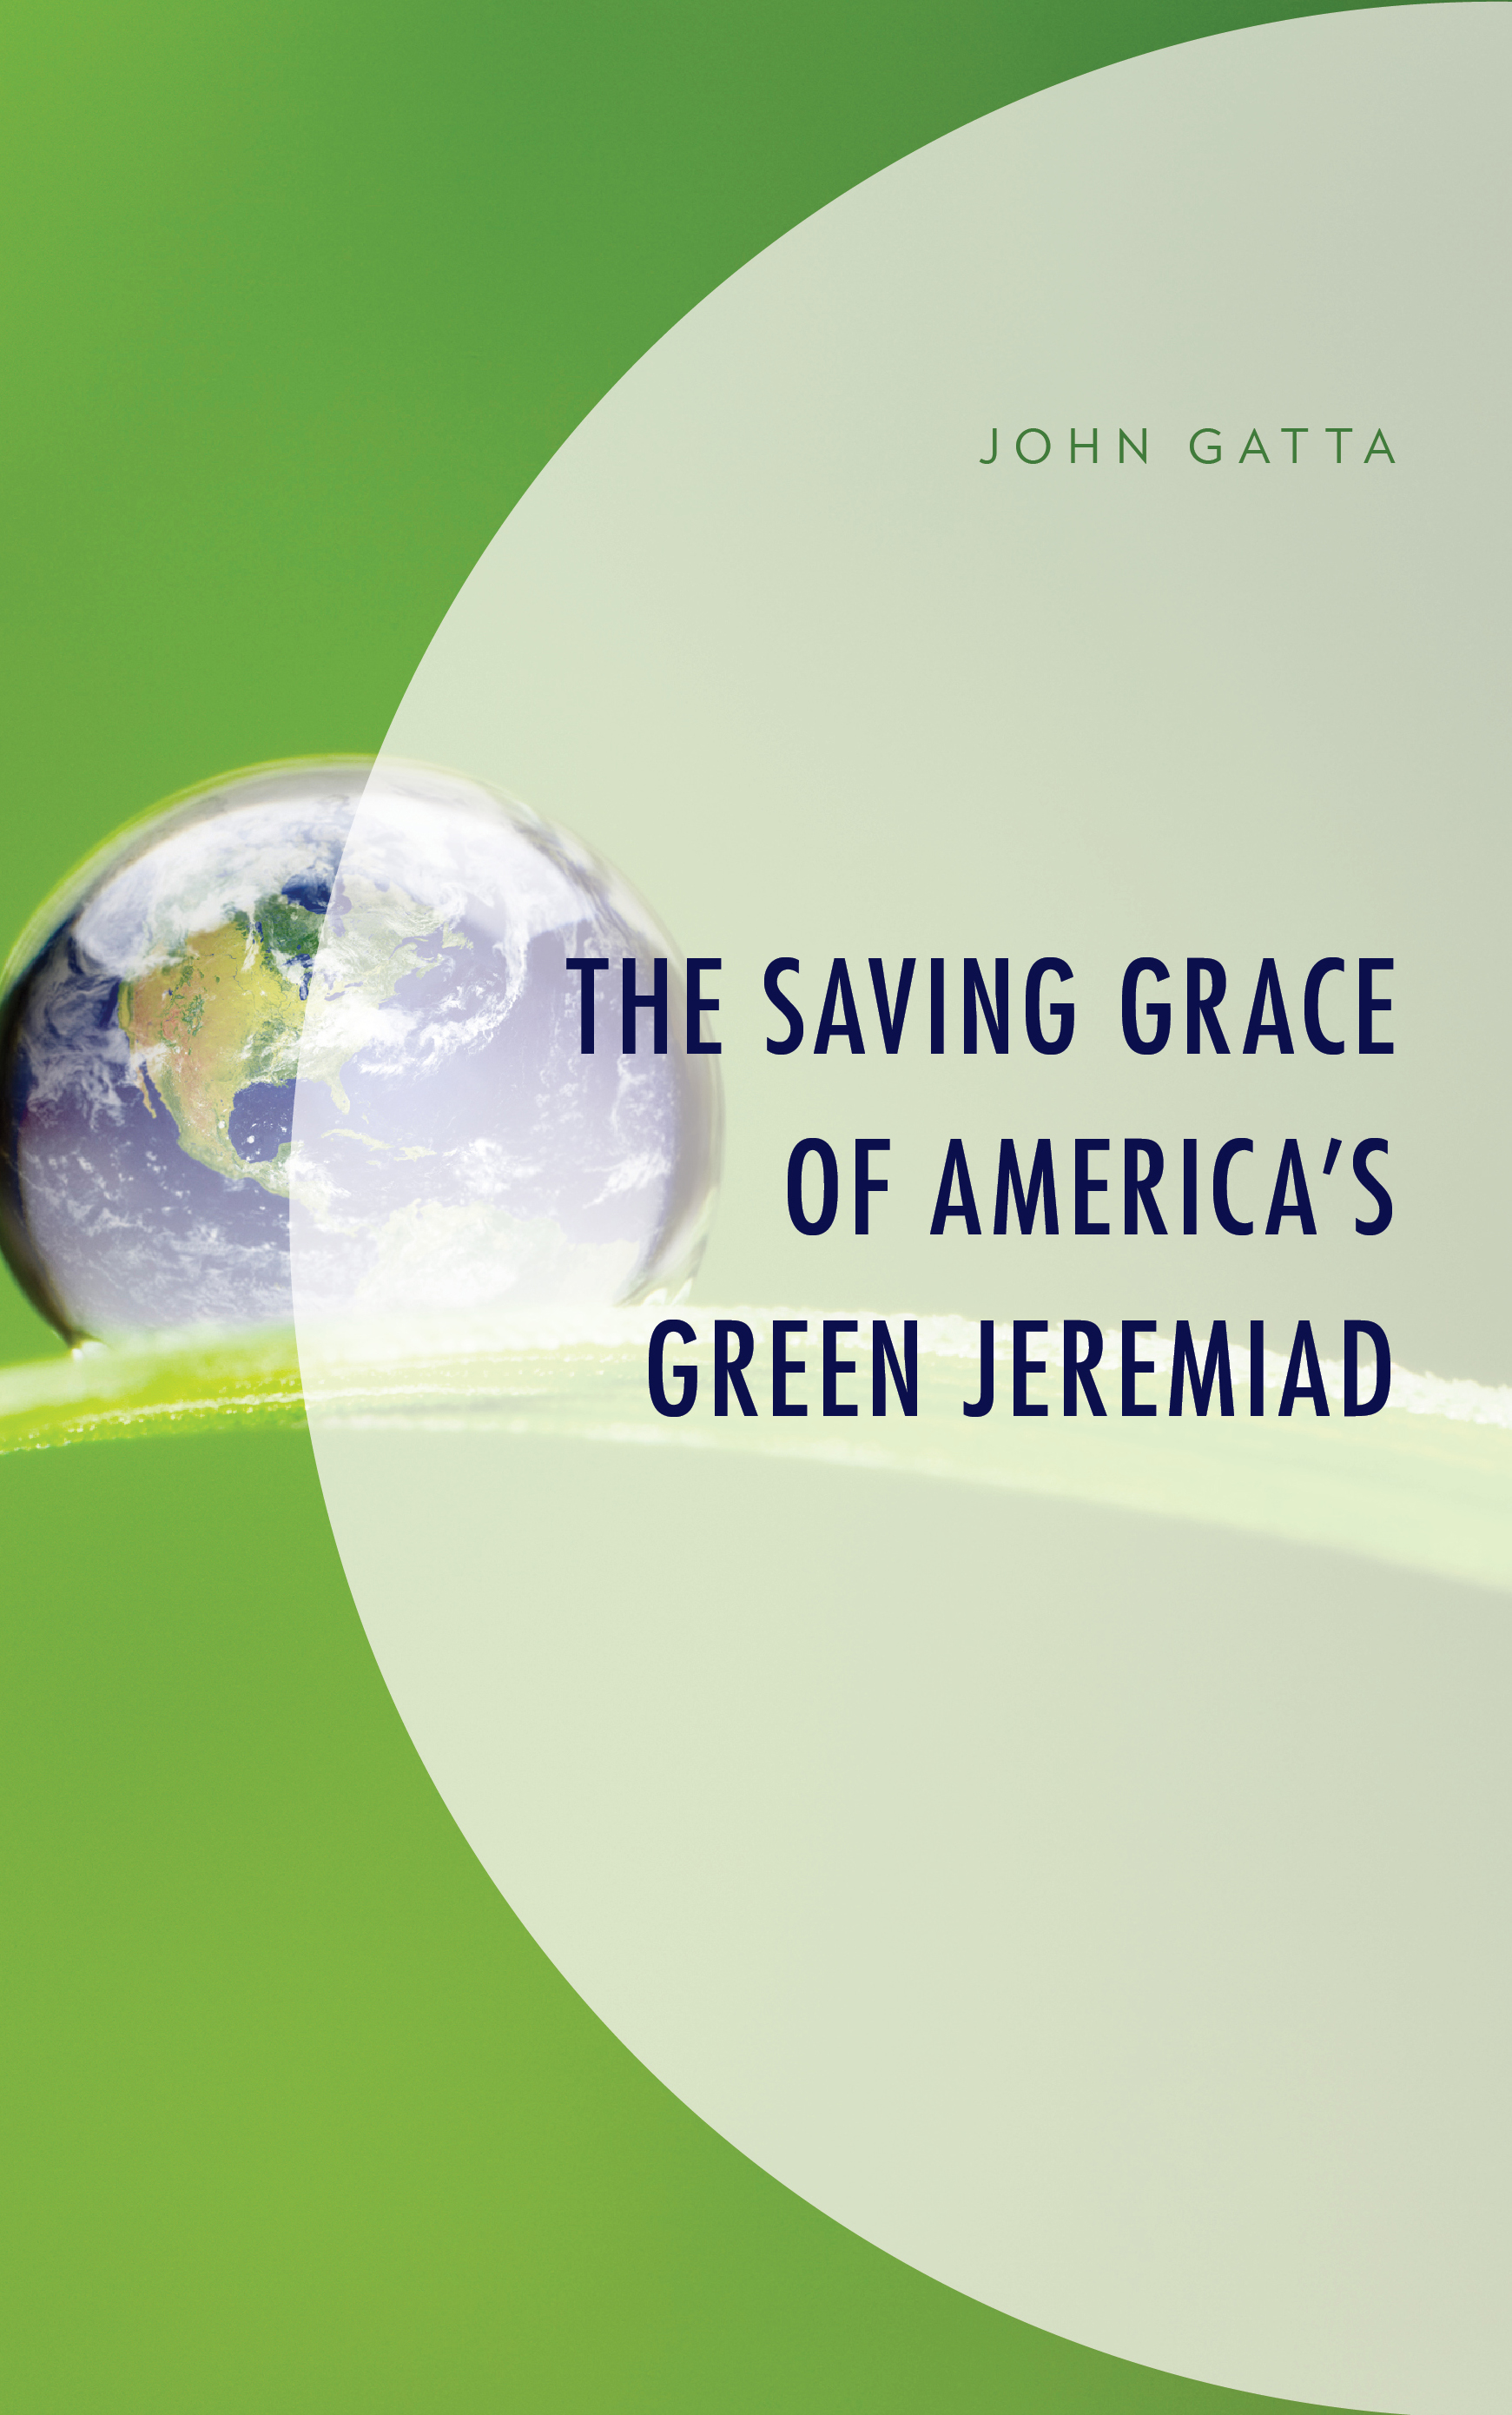 The Saving Grace of America's Green Jeremiad